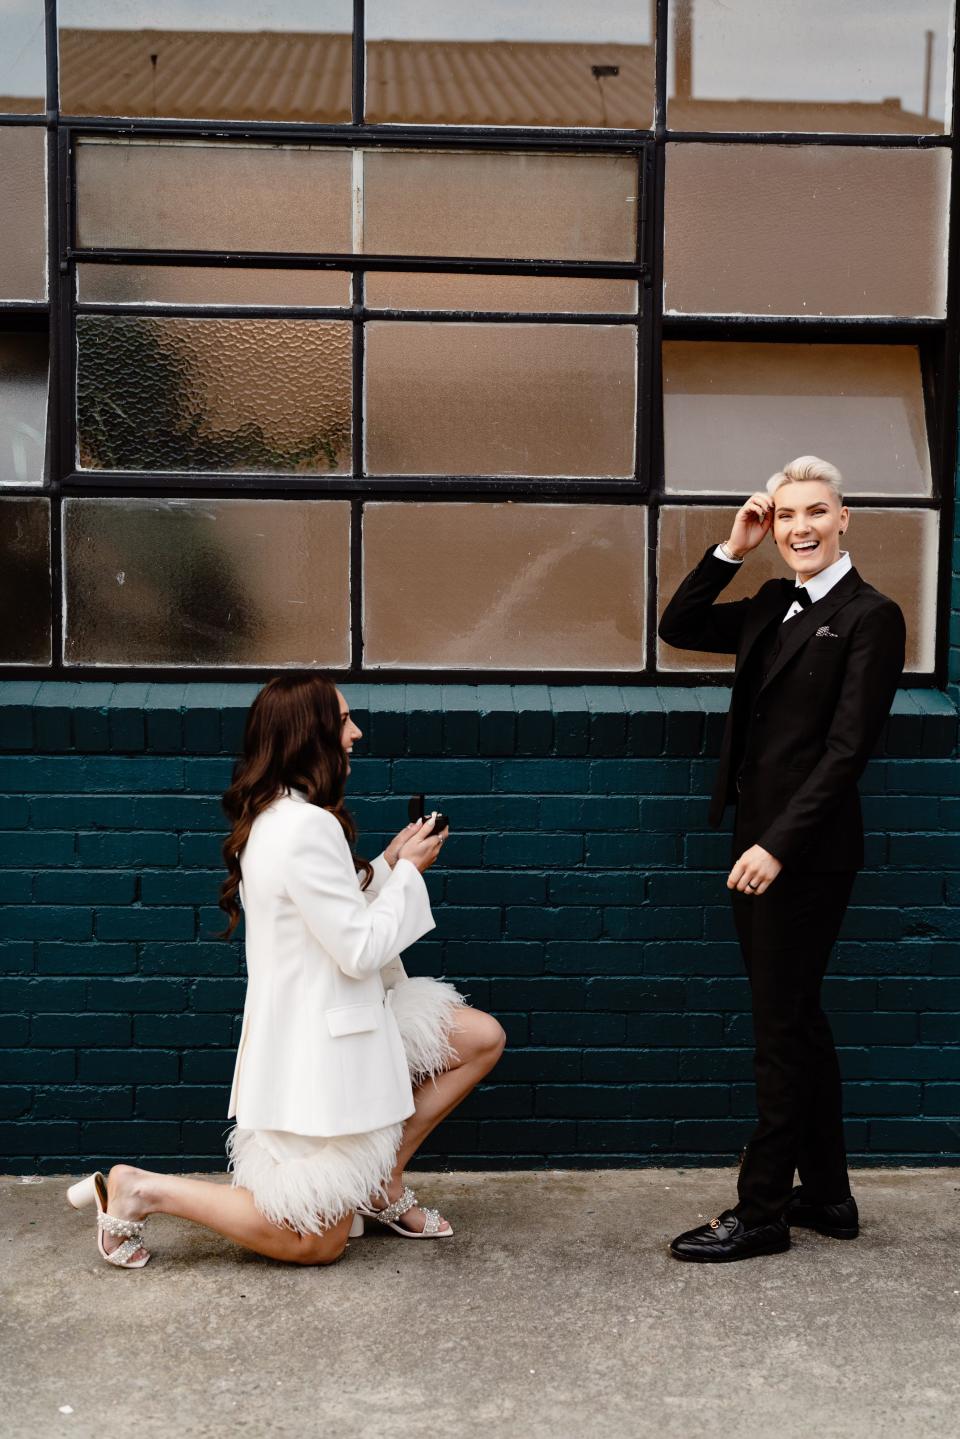 Morgan Owen proposing to her partner Axe. She's wearing a white dress and down on one knee.